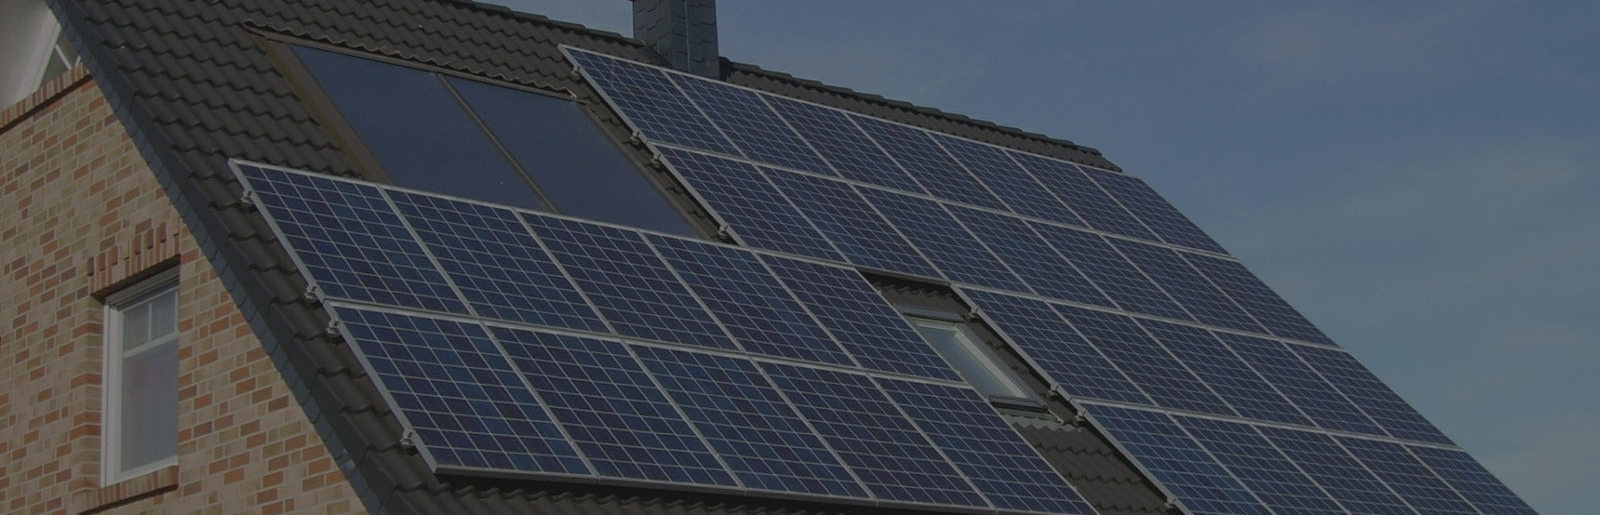 PV Solar panels on the roof of a house